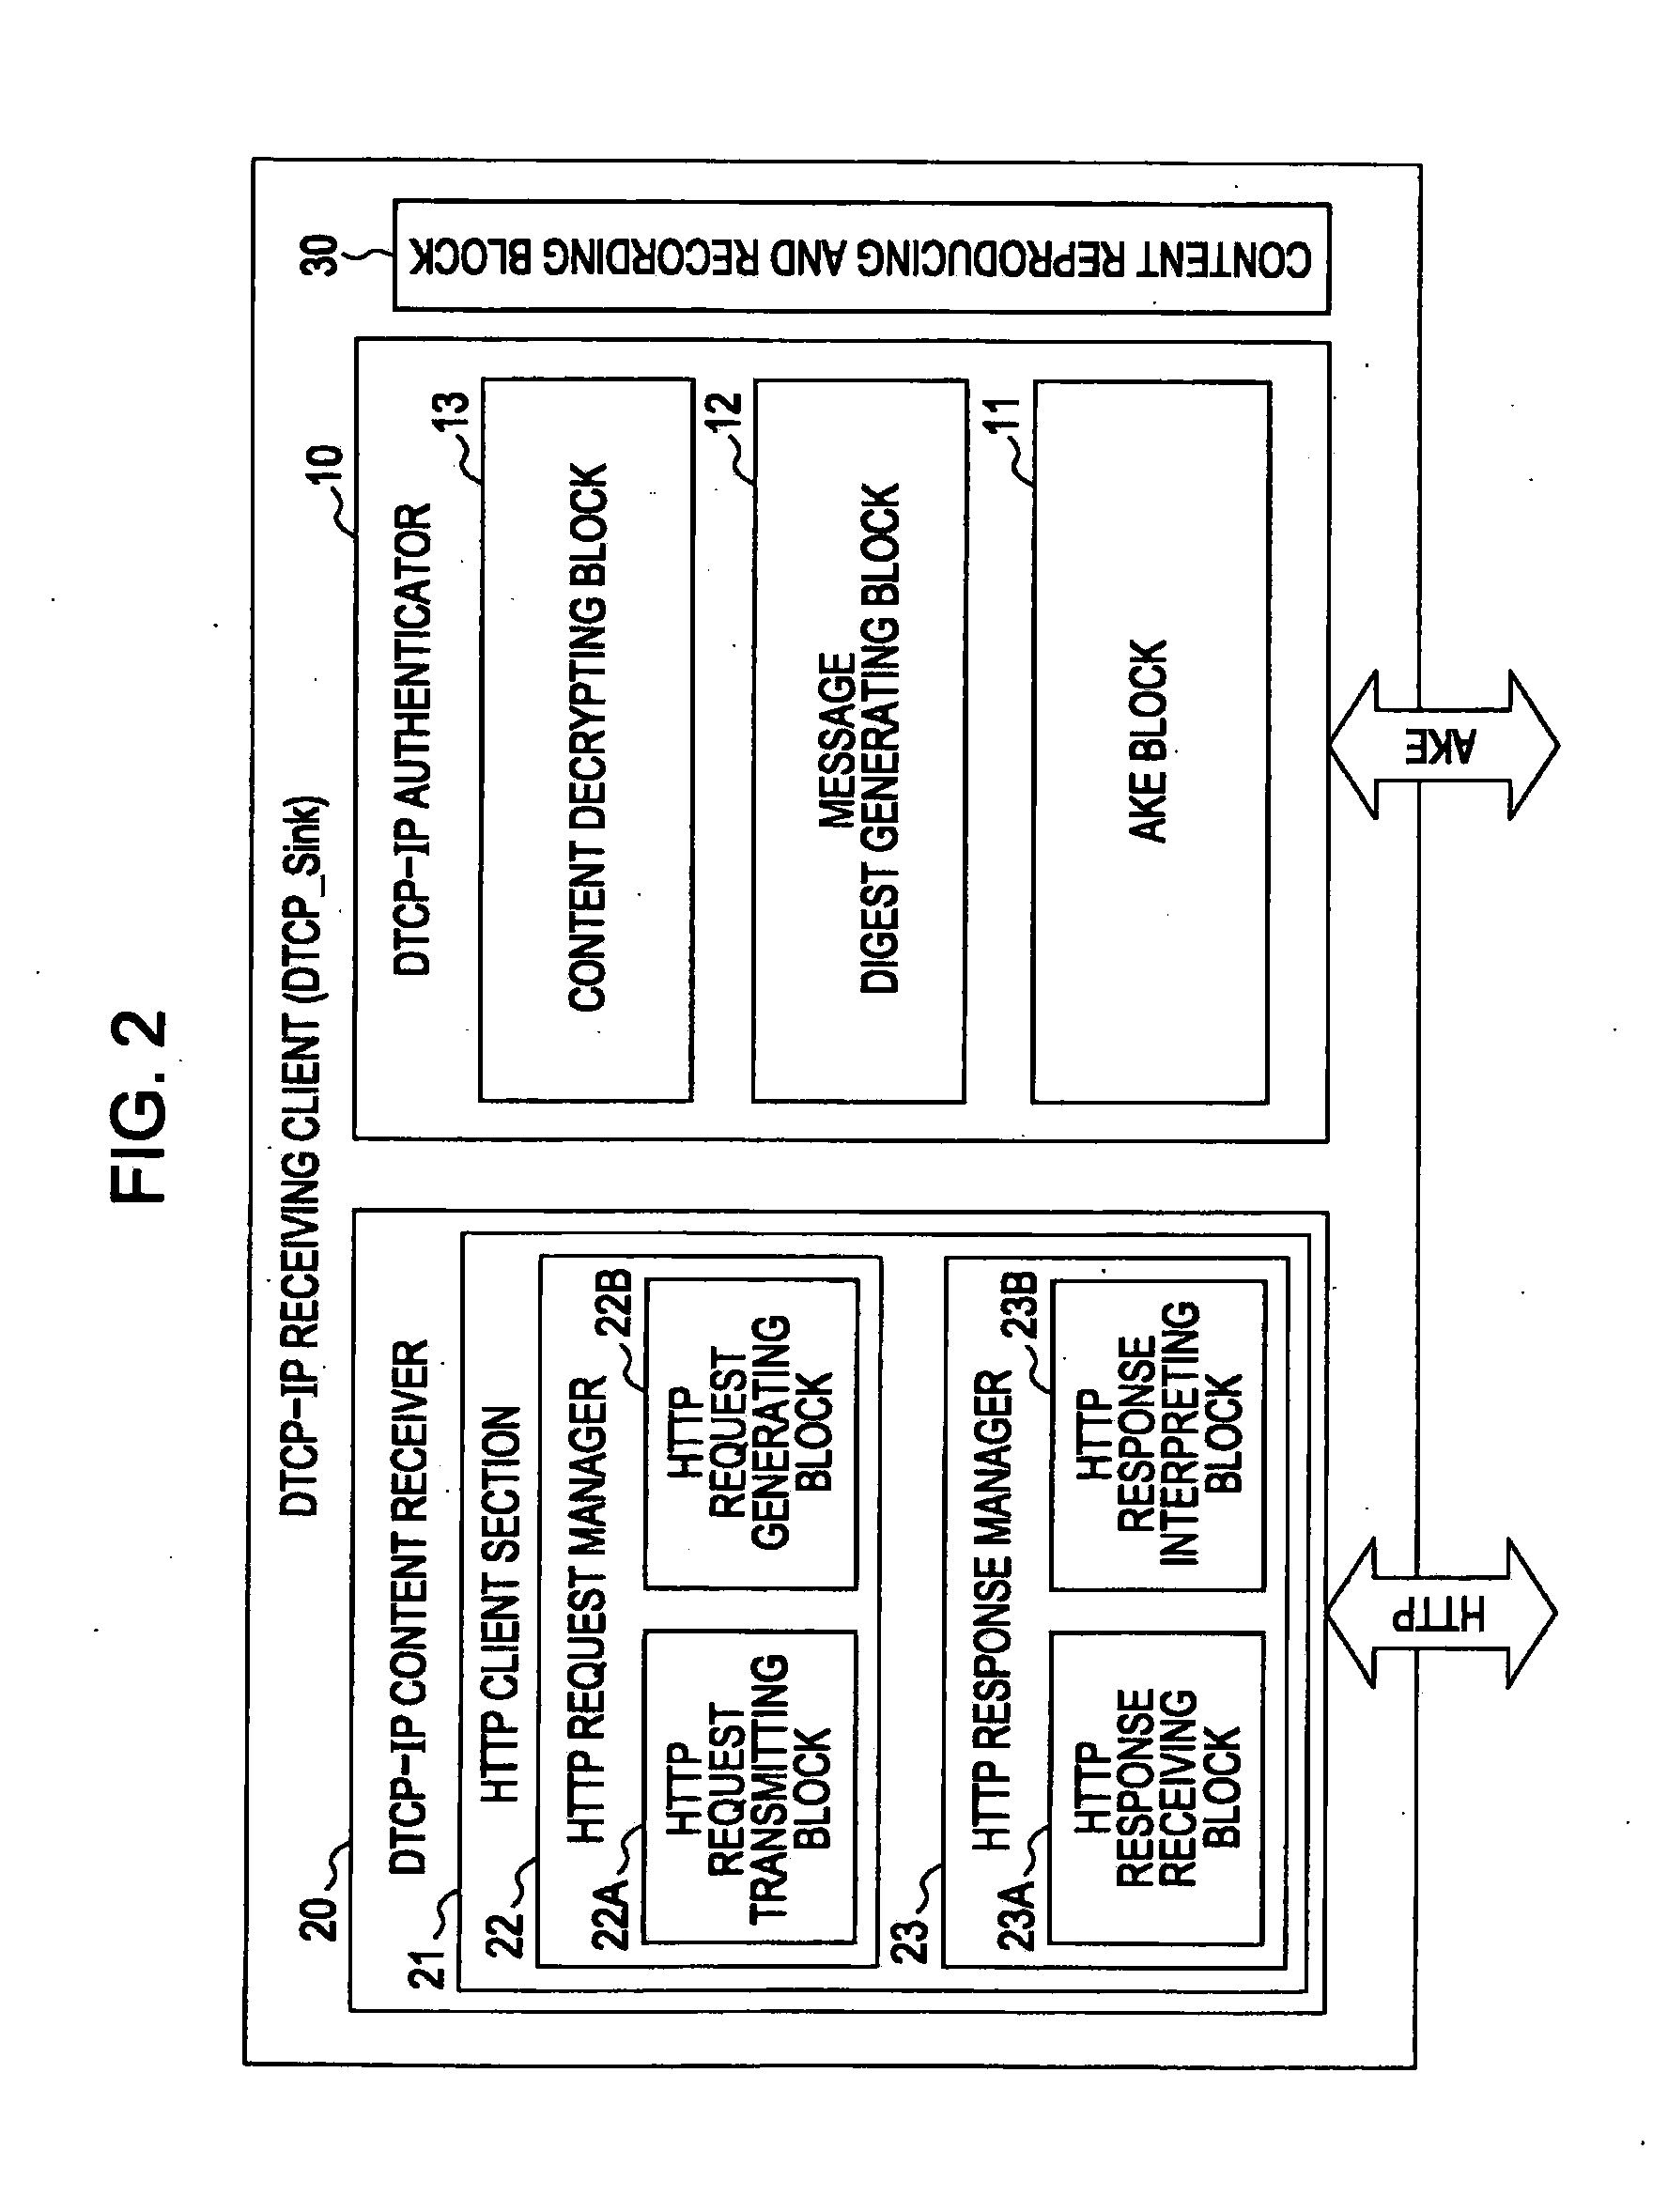 System, apparatus, method and computer program for transferring content